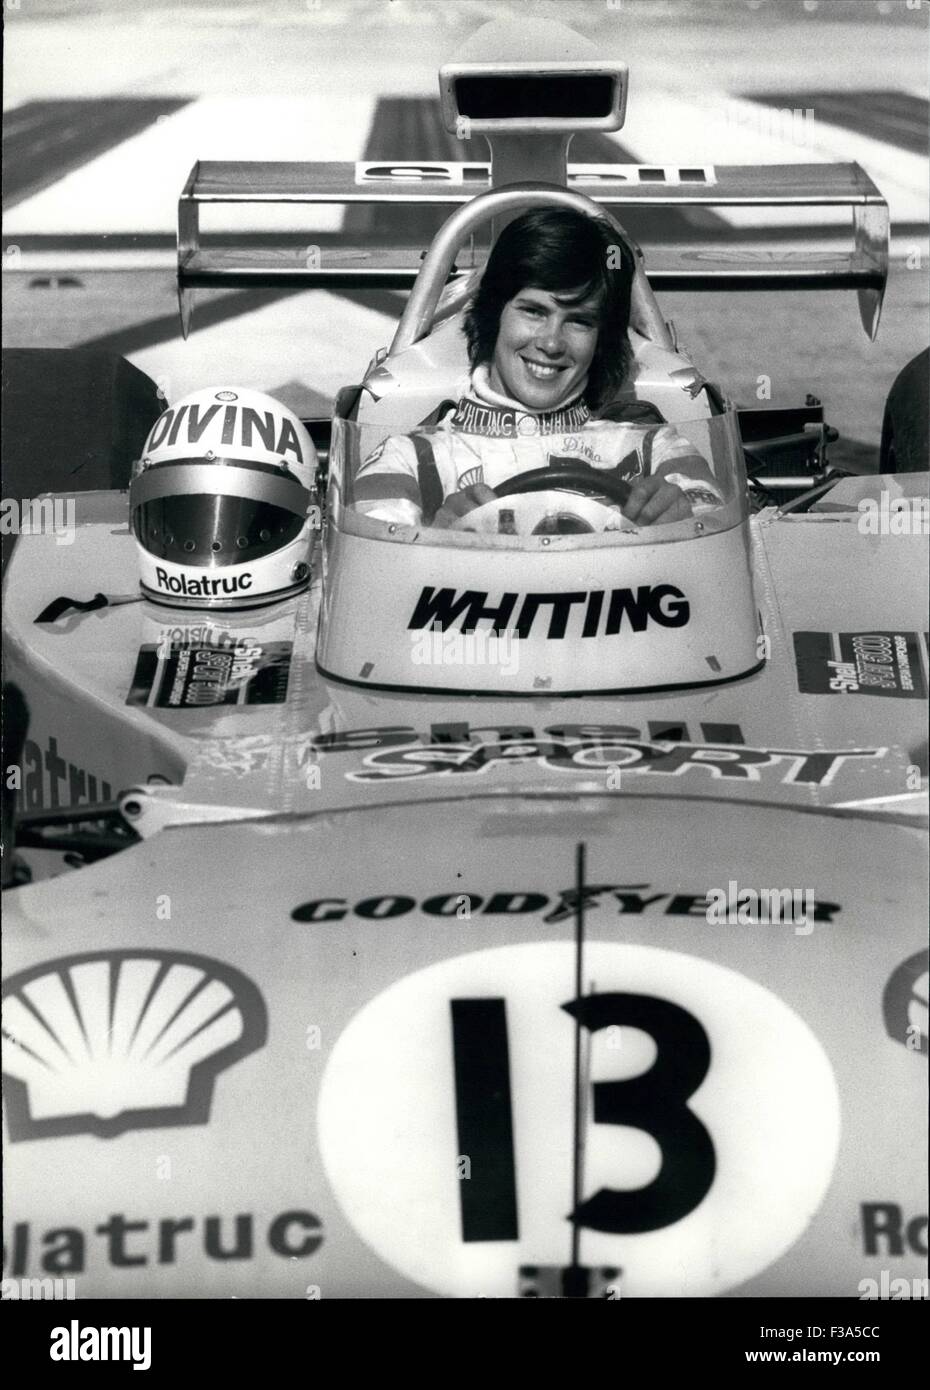 Photo Shows. 21st Dec, 1975. Top British Woman Racing Driver Divia galica, Seen in her Surtees Formula 1 Racing Car, Discovers That No.13 Turned Out to Be her Lucky Number at Raf Fairford today, Where she set up five new speed records. © Keystone Pictures USA/ZUMAPRESS.com/Alamy Live News Stock Photo